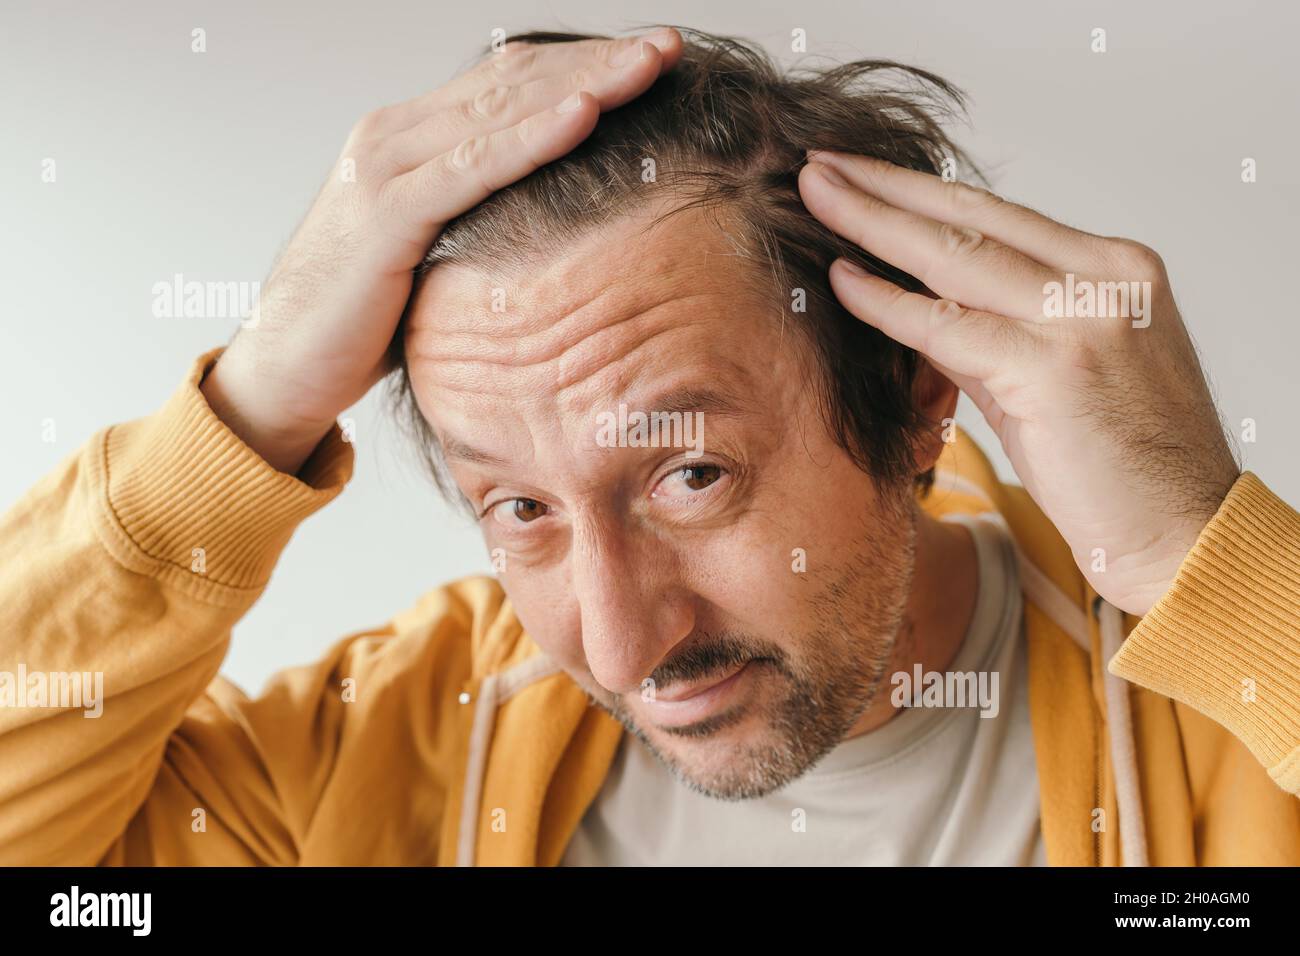 Hair loss, man looking at the mirror concerned about losing his hair at forehead, selective focus Stock Photo